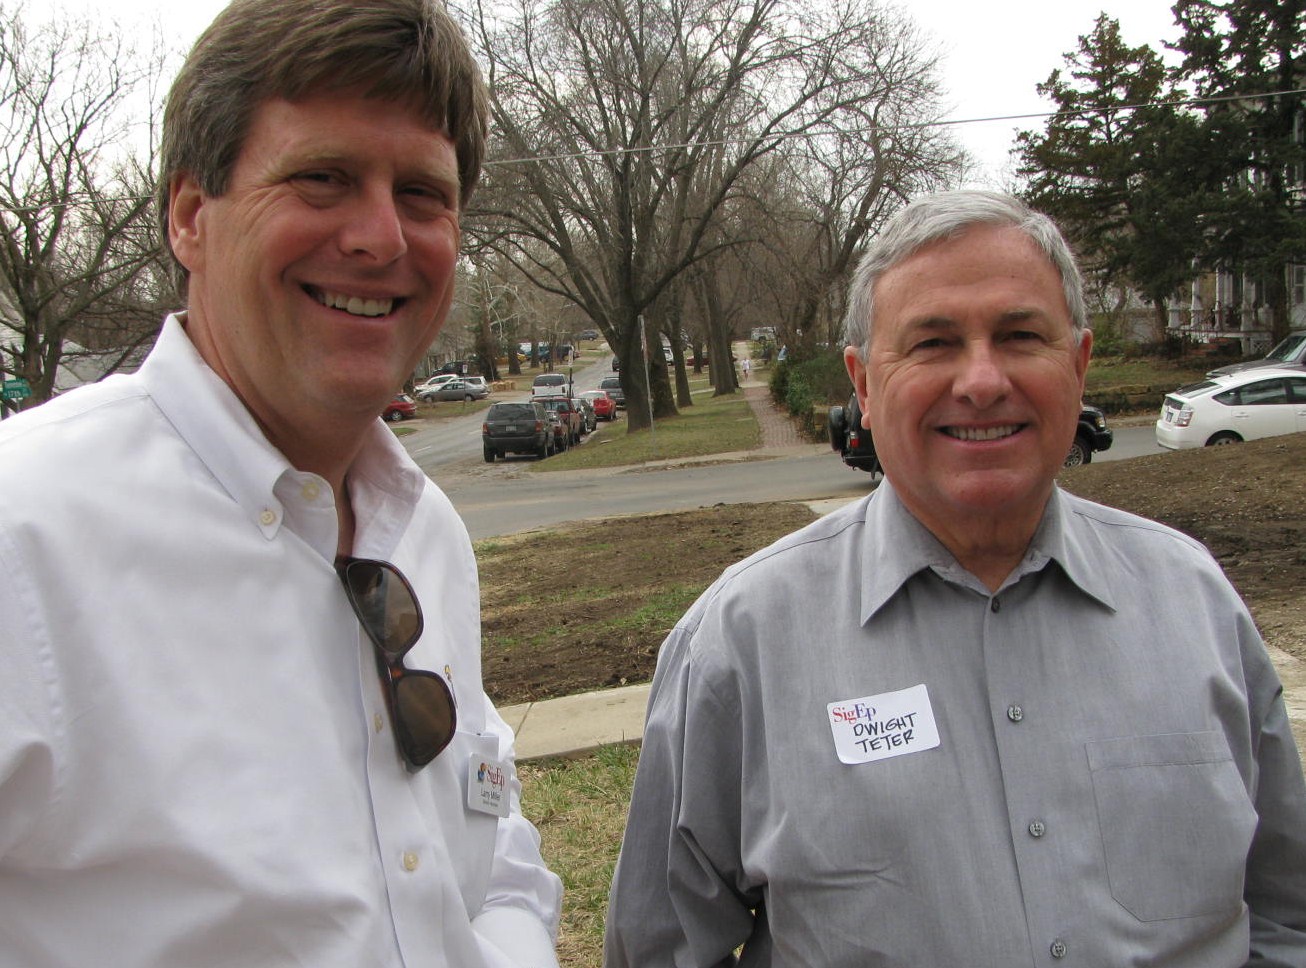 1960 -- Larry Miller & Dwight Teter, in 2009, at SigEp's Expansion Ribbon Cutting